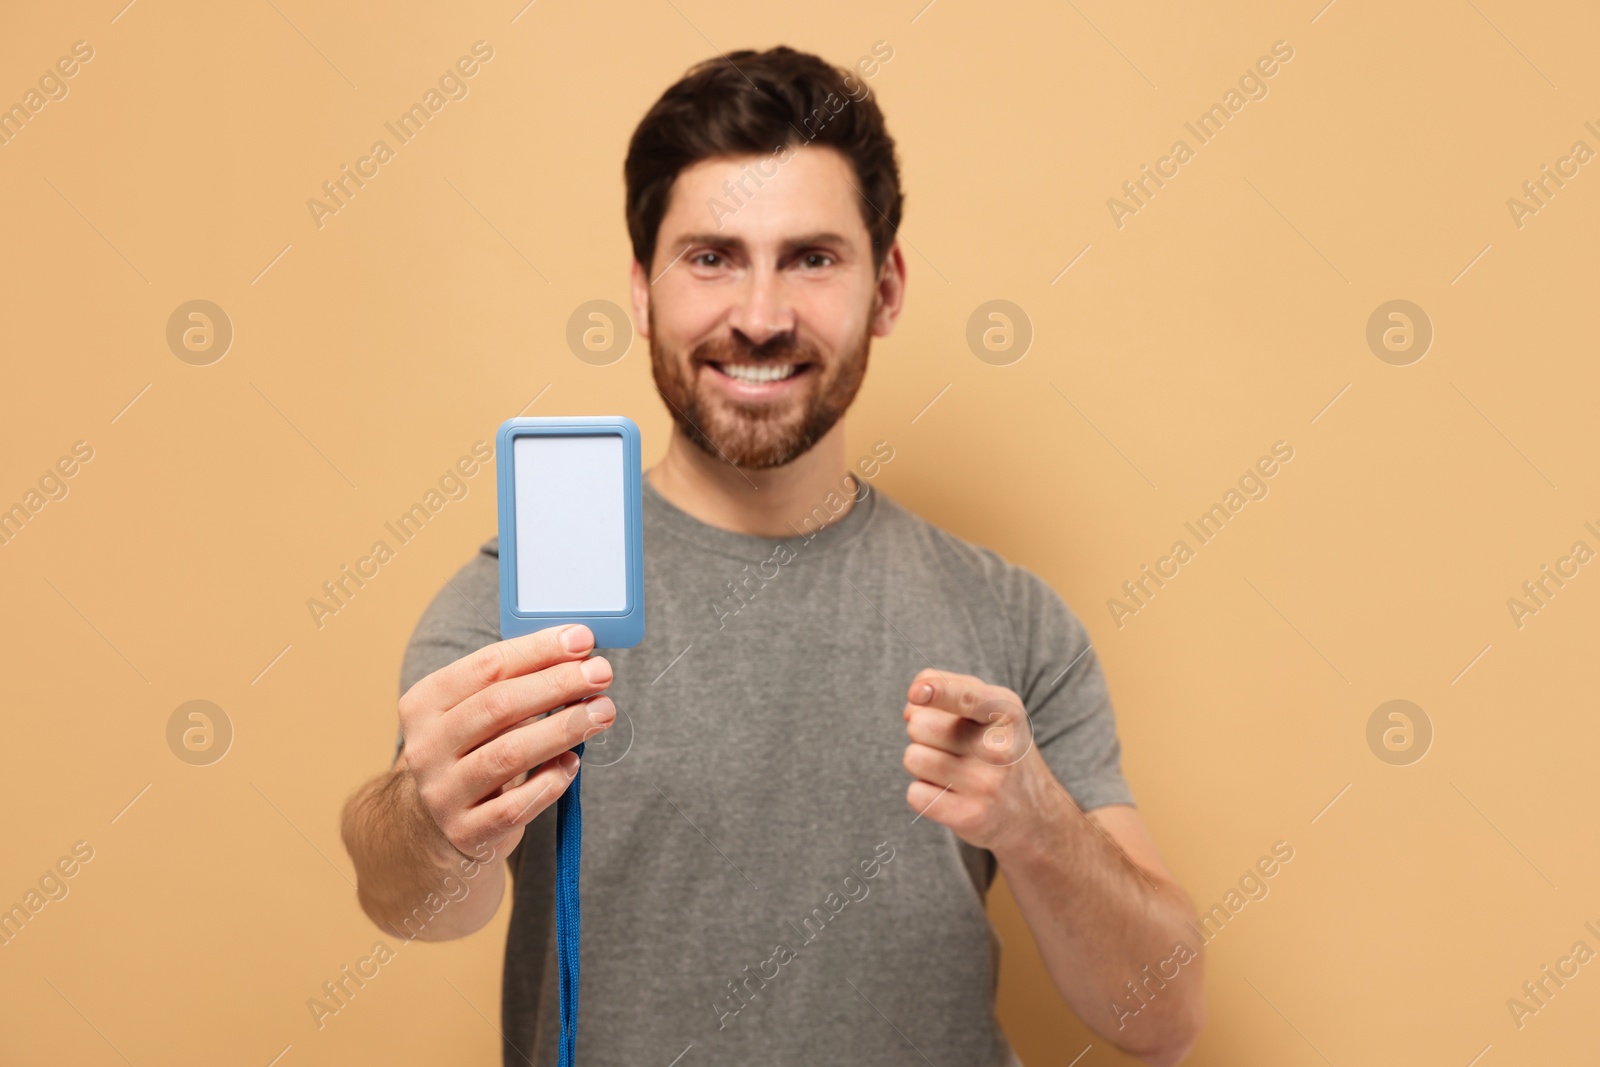 Photo of Happy man showing VIP pass badge against beige background, focus on hand